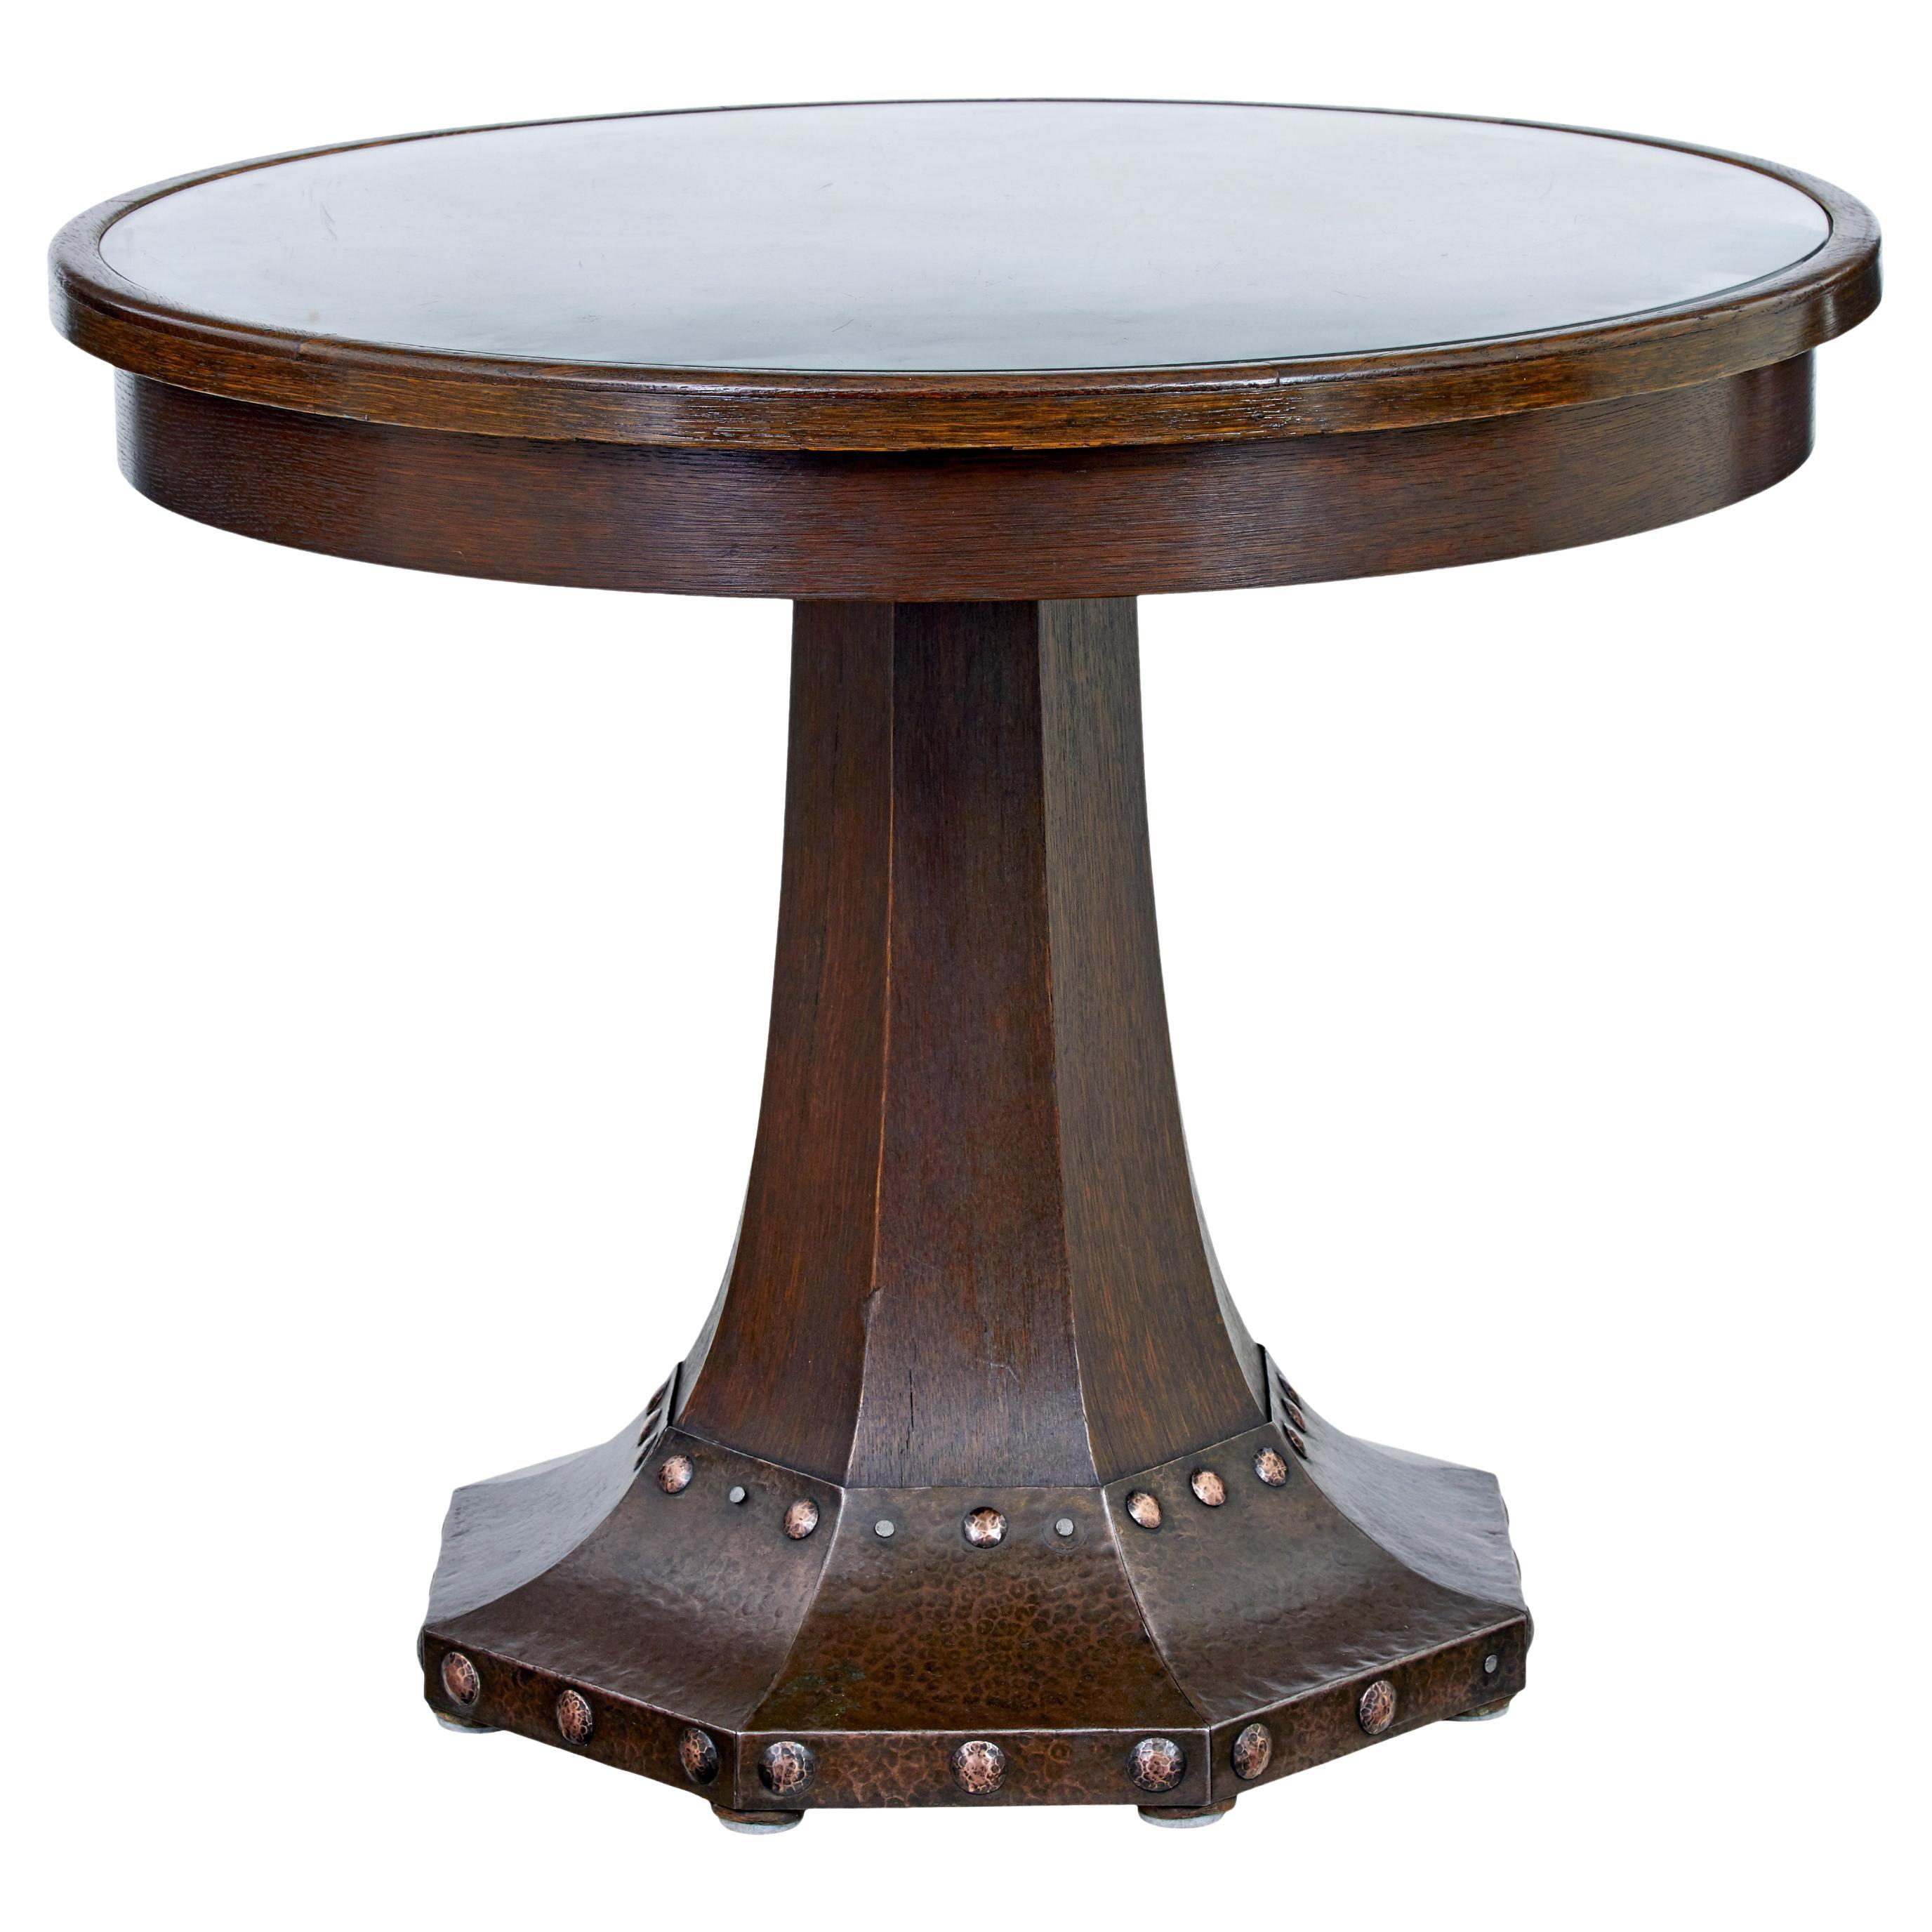 19th Century oak and copper aesthetic movement center table